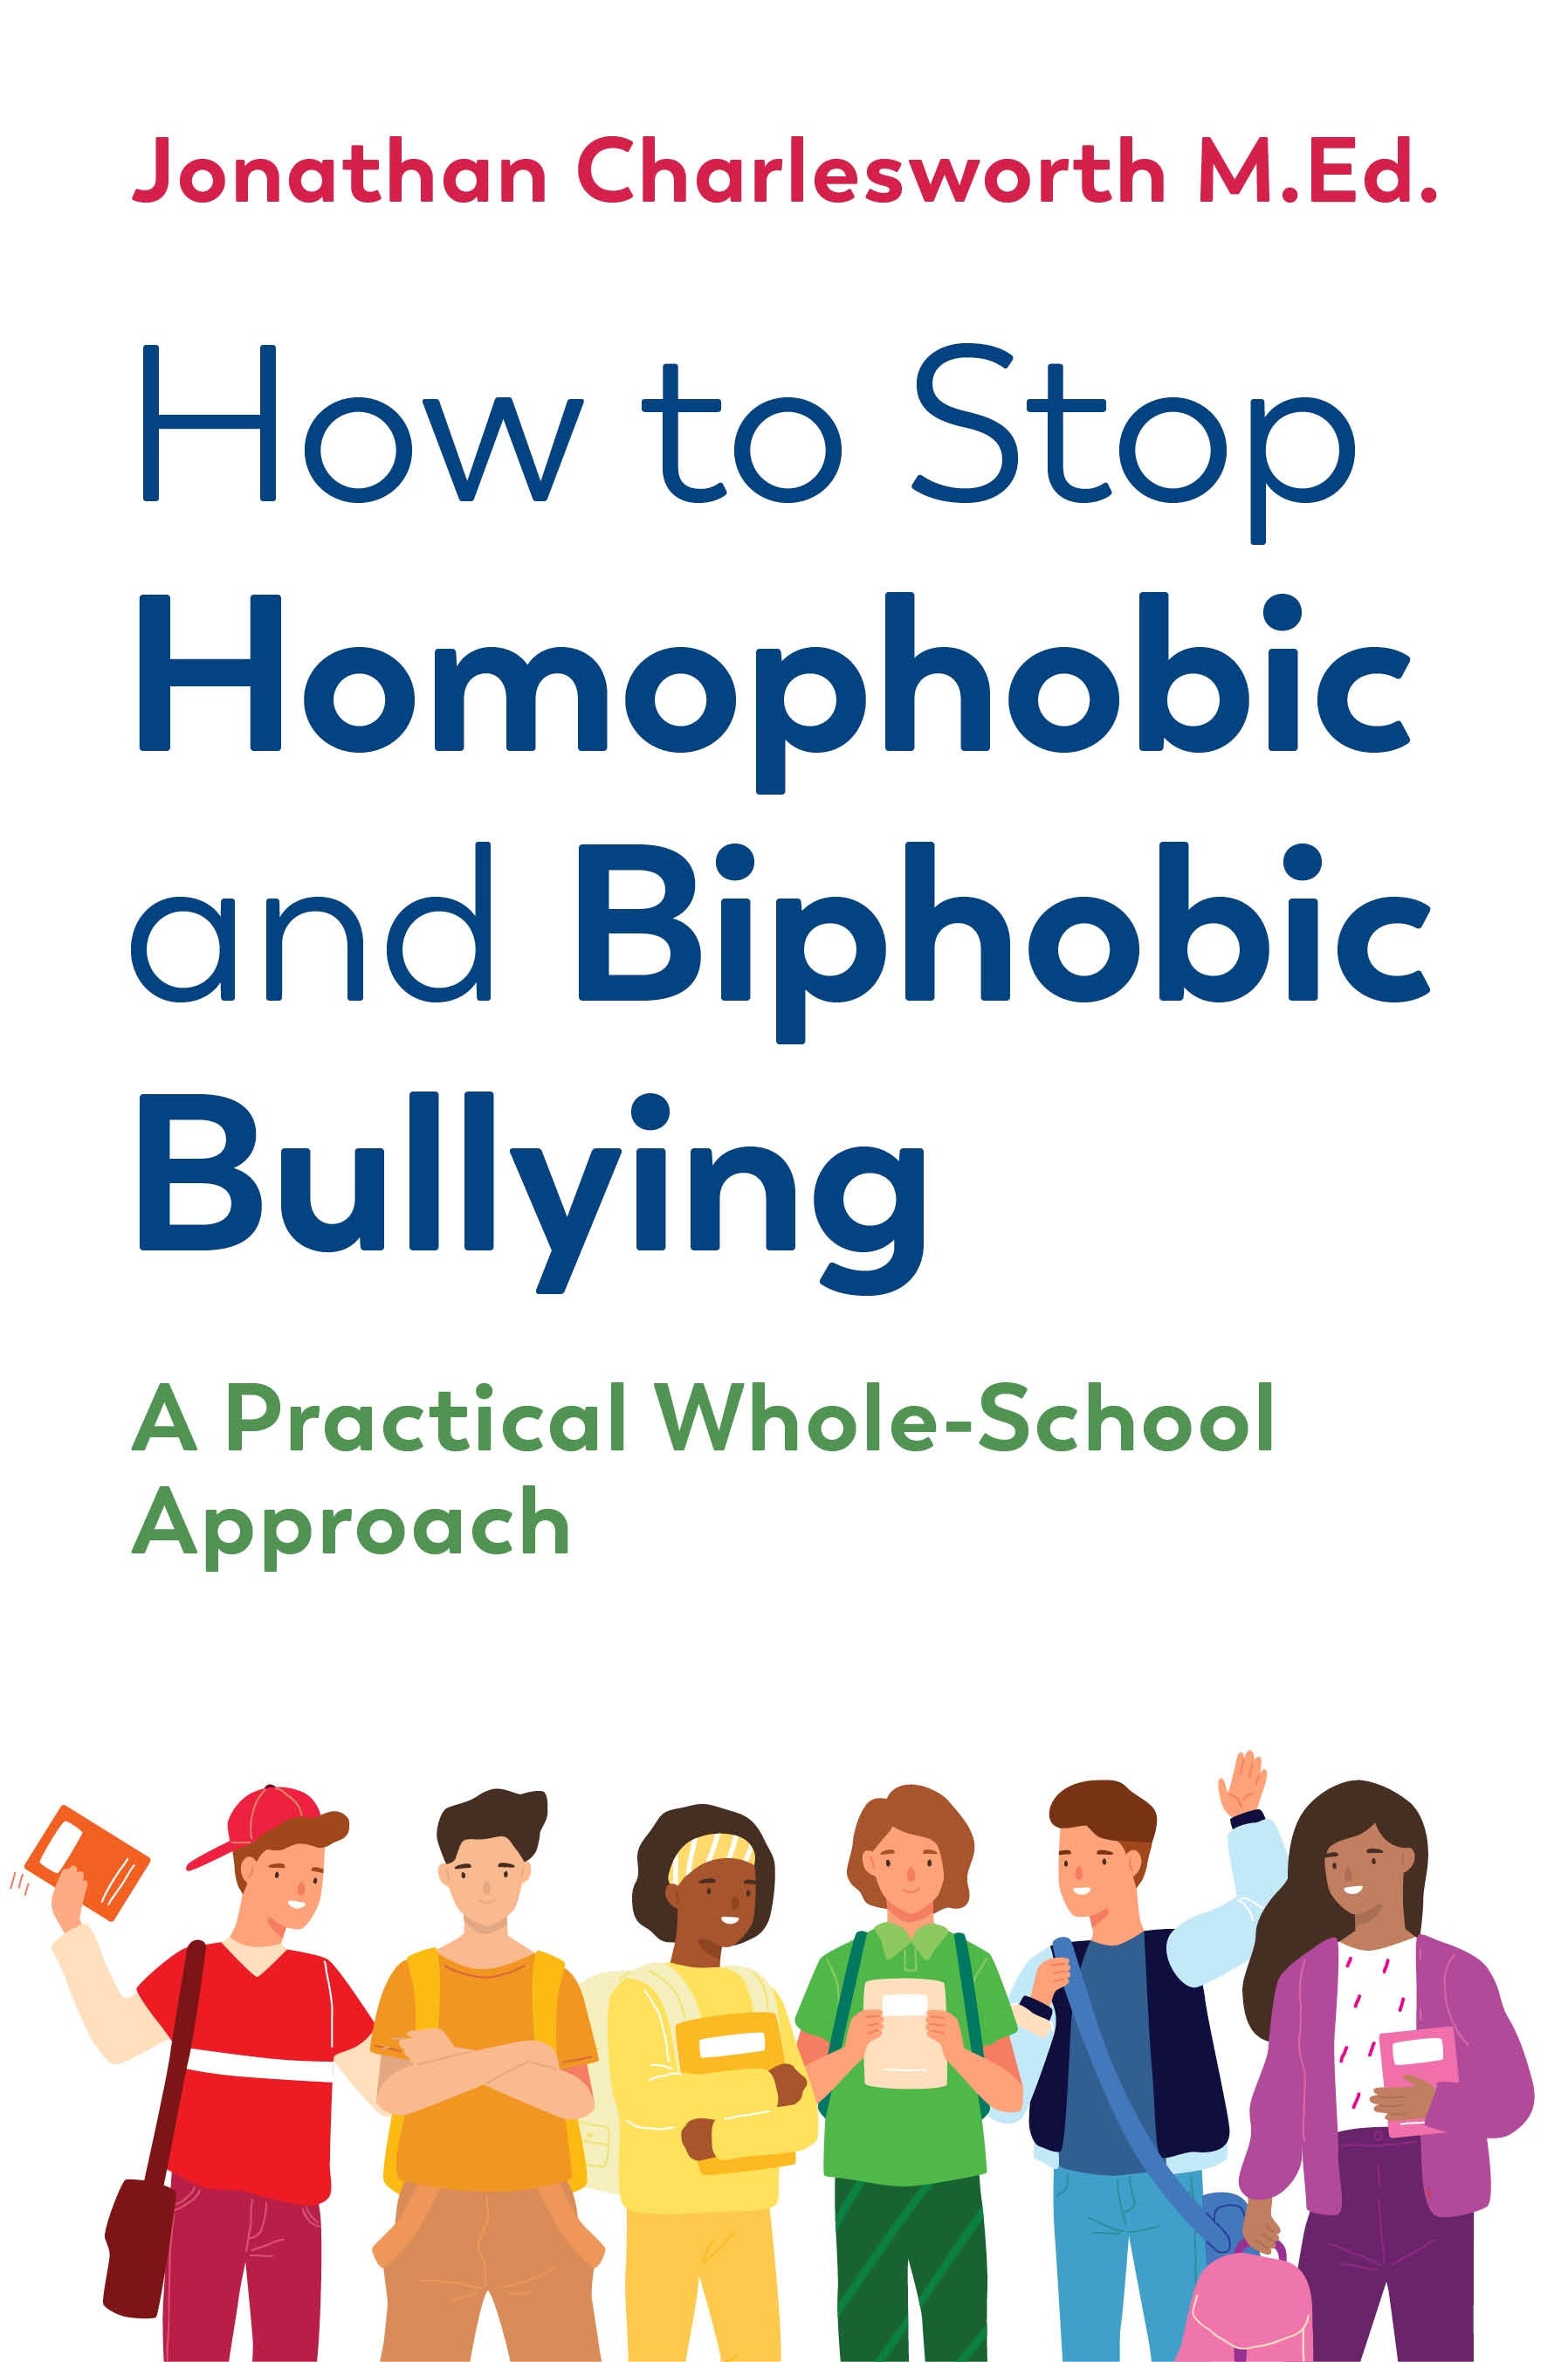 How to Stop Homophobic and Biphobic Bullying by Jonathan Charlesworth, Prof Peter Smith